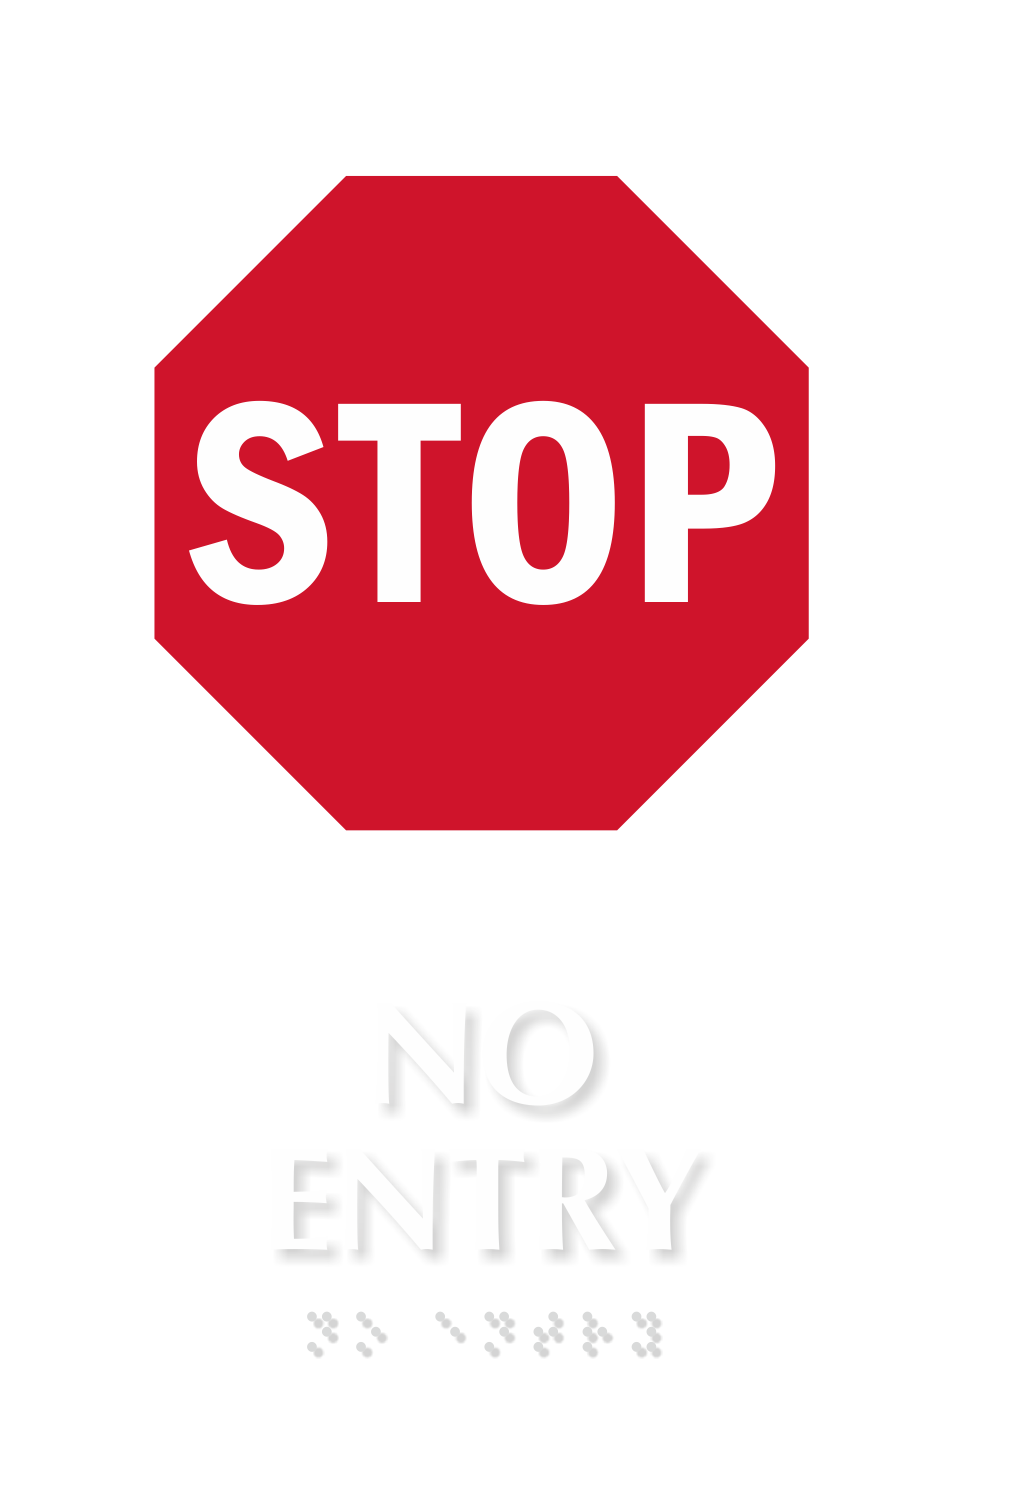 Stop No Entry TactileTouch Braille Sign